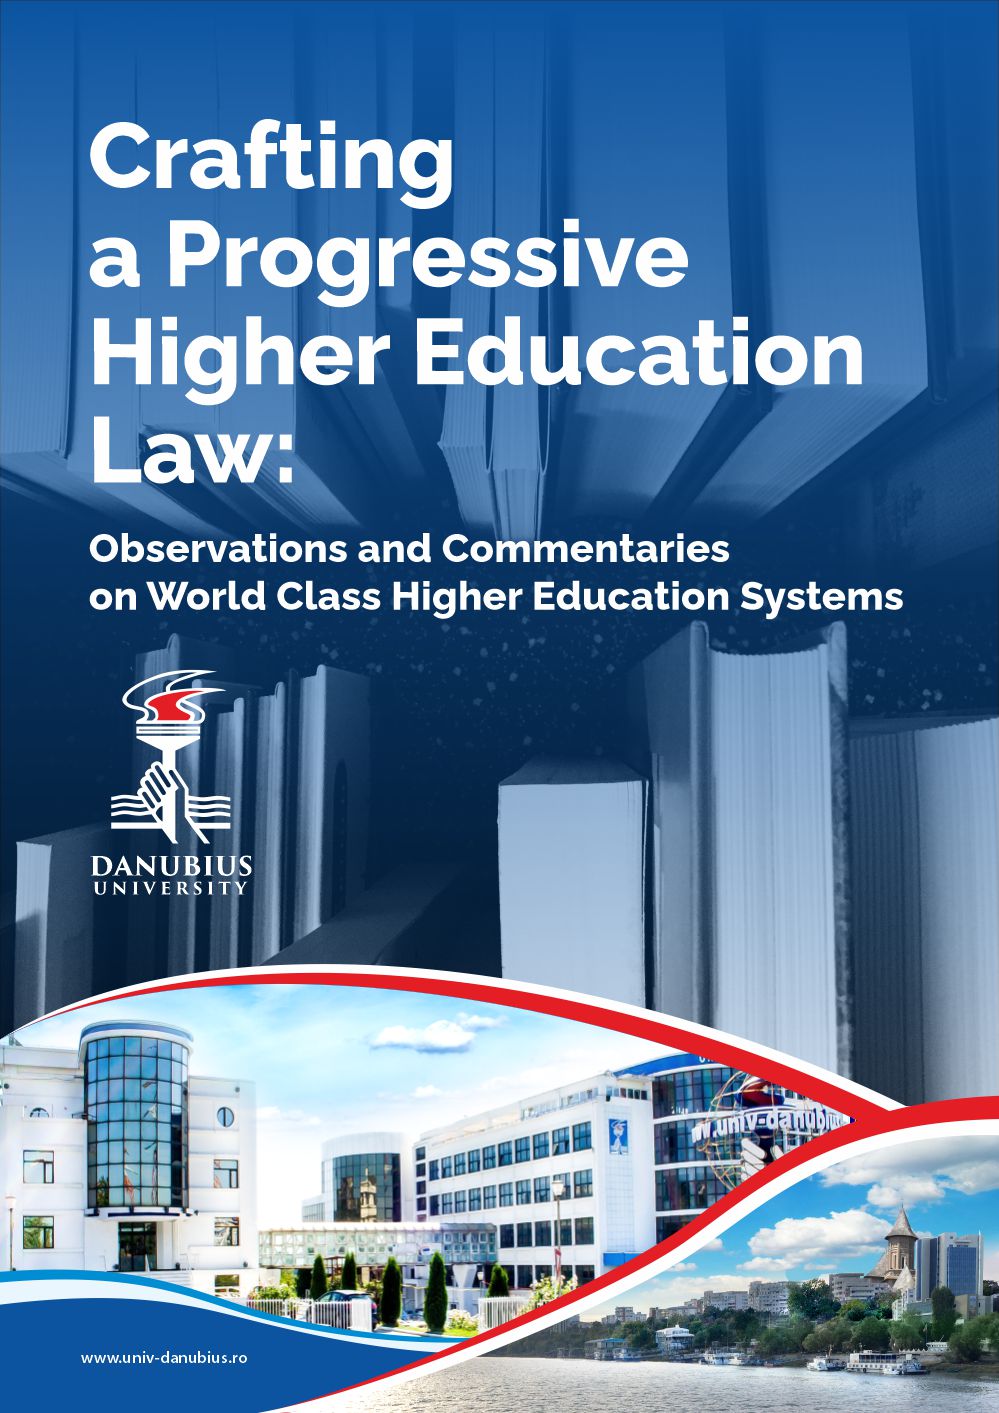 Crafting a Progressive Higher Education Law - Observations and Commentaries on World Class Higher Education Systems